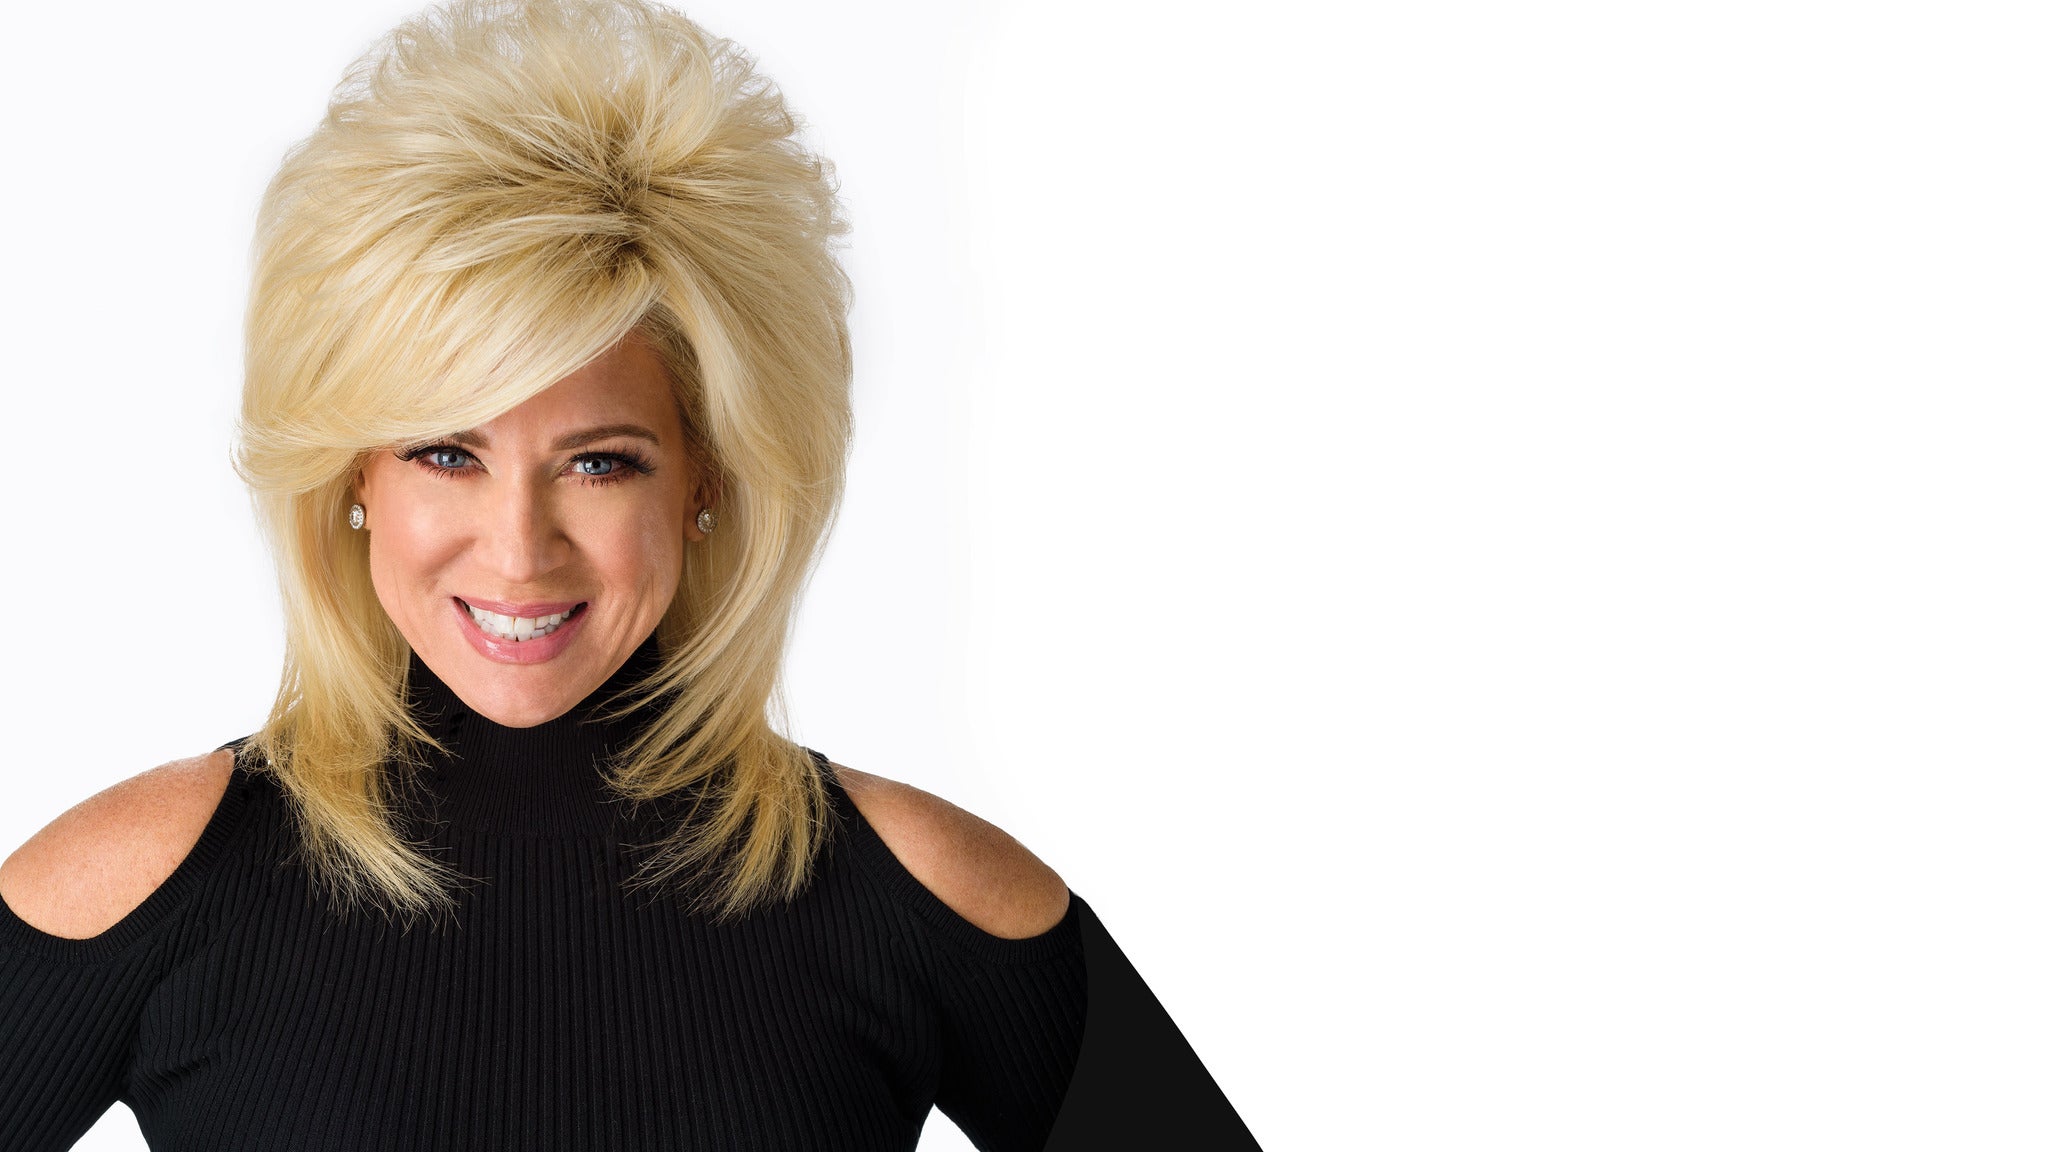 Theresa Caputo presale code for early tickets in Rama